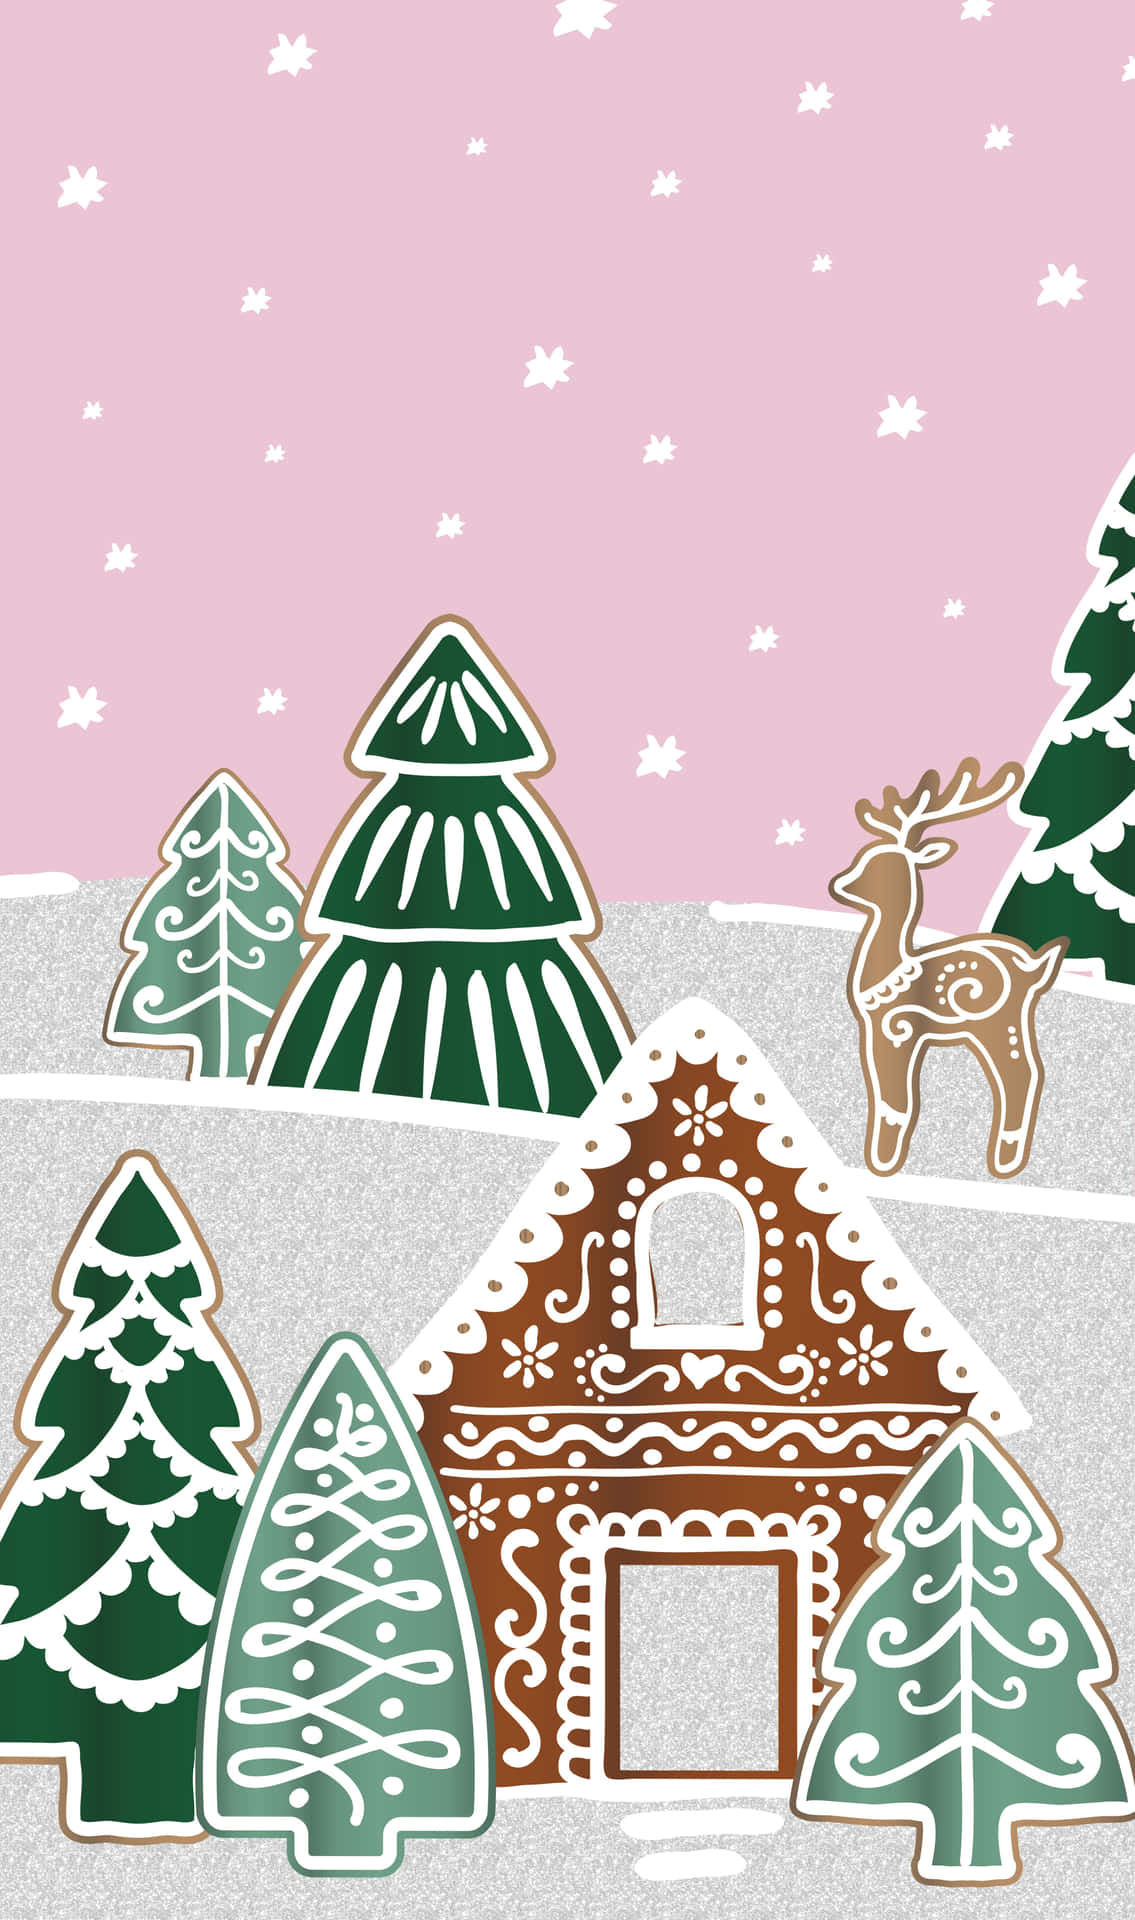 Enjoy the Festive Time with a Cute Christmas Phone Wallpaper